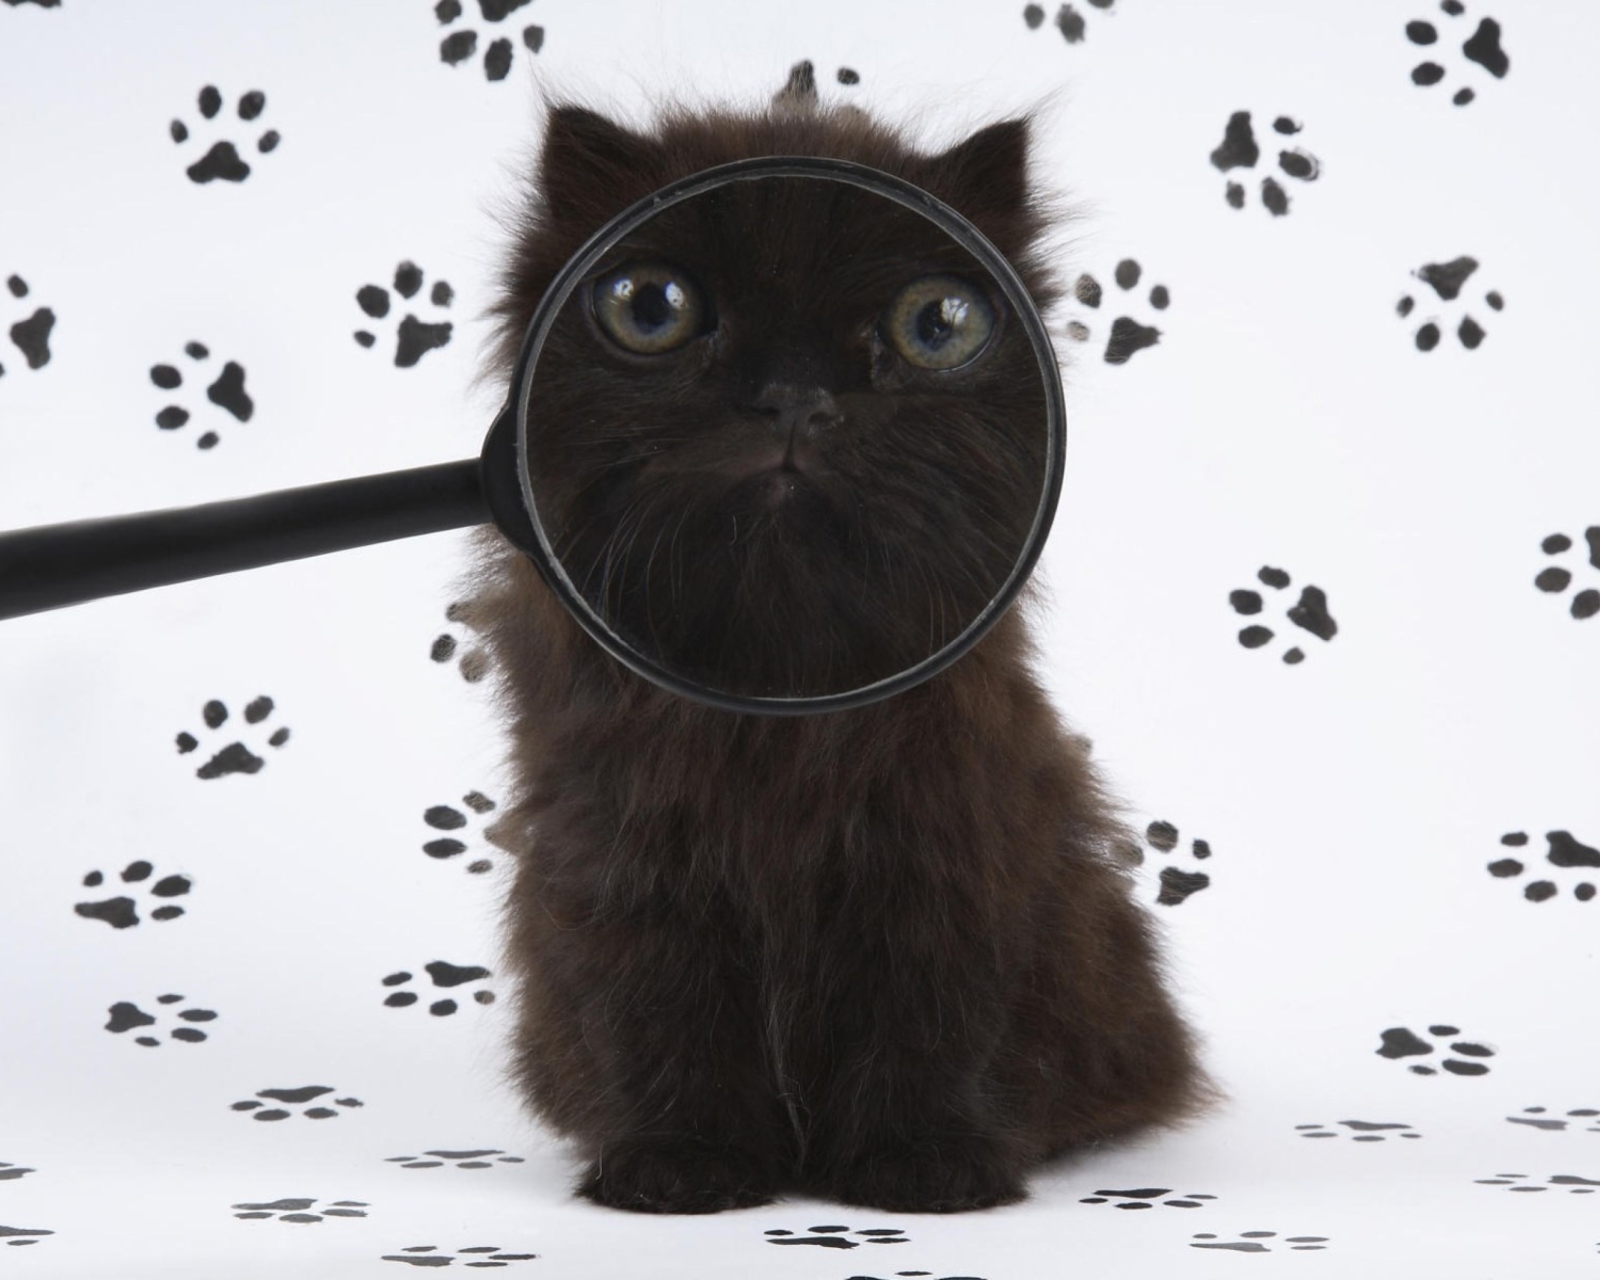 Cat And Magnifying Glass wallpaper 1600x1280